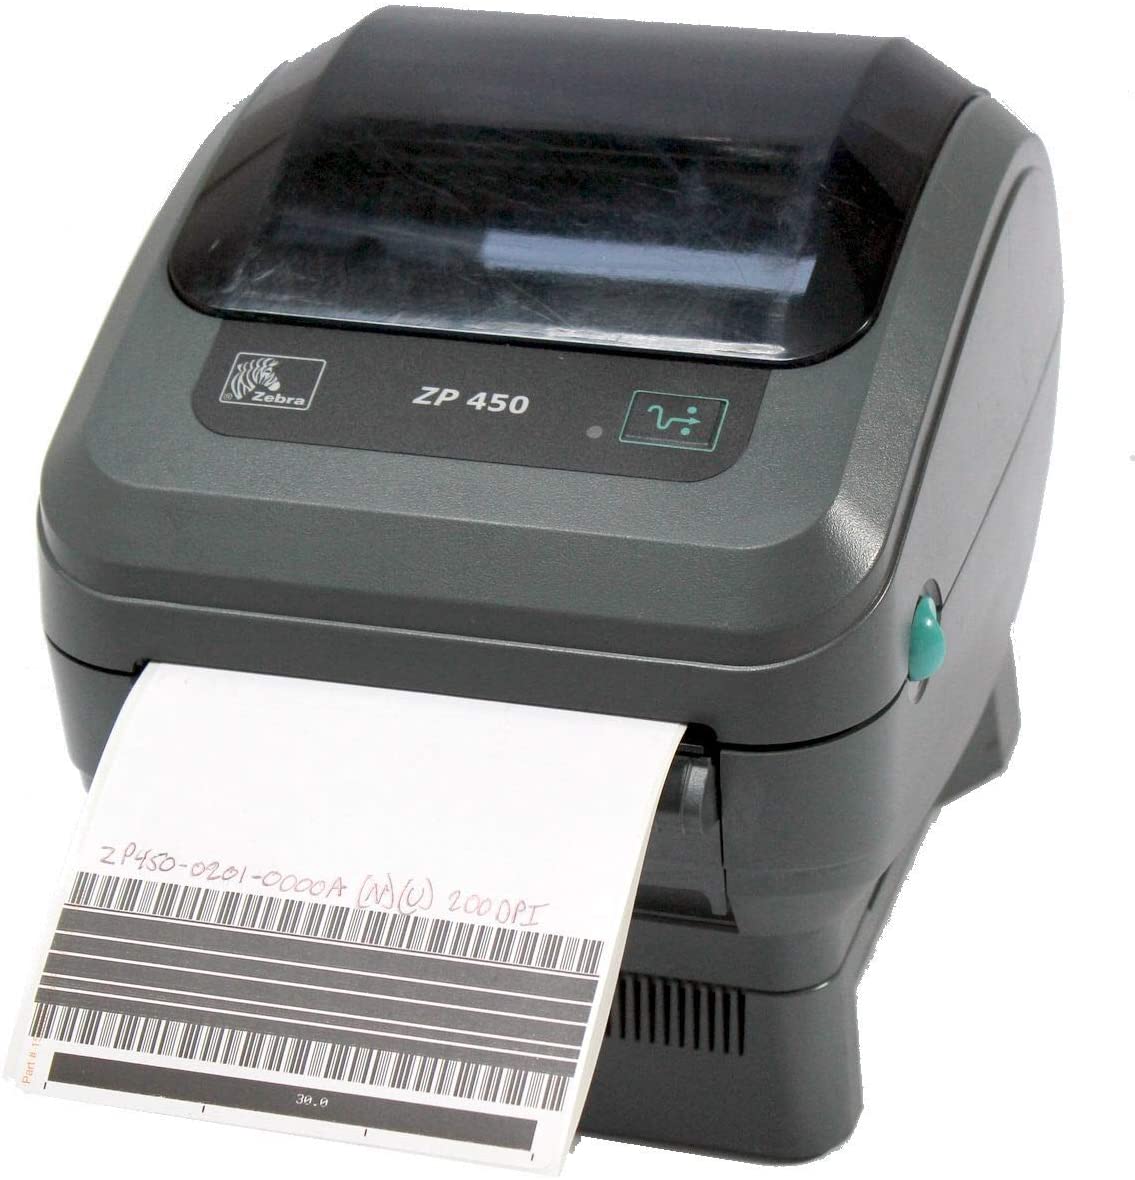 Labels You will need a label for every product you send out.Printer + scissors will work to start I recommend getting a thermal printer thoughIt saves me so much time every day Check out either :- Rollo Printer- Zebra ZP450Get bulk 4x6 labels on eBay 